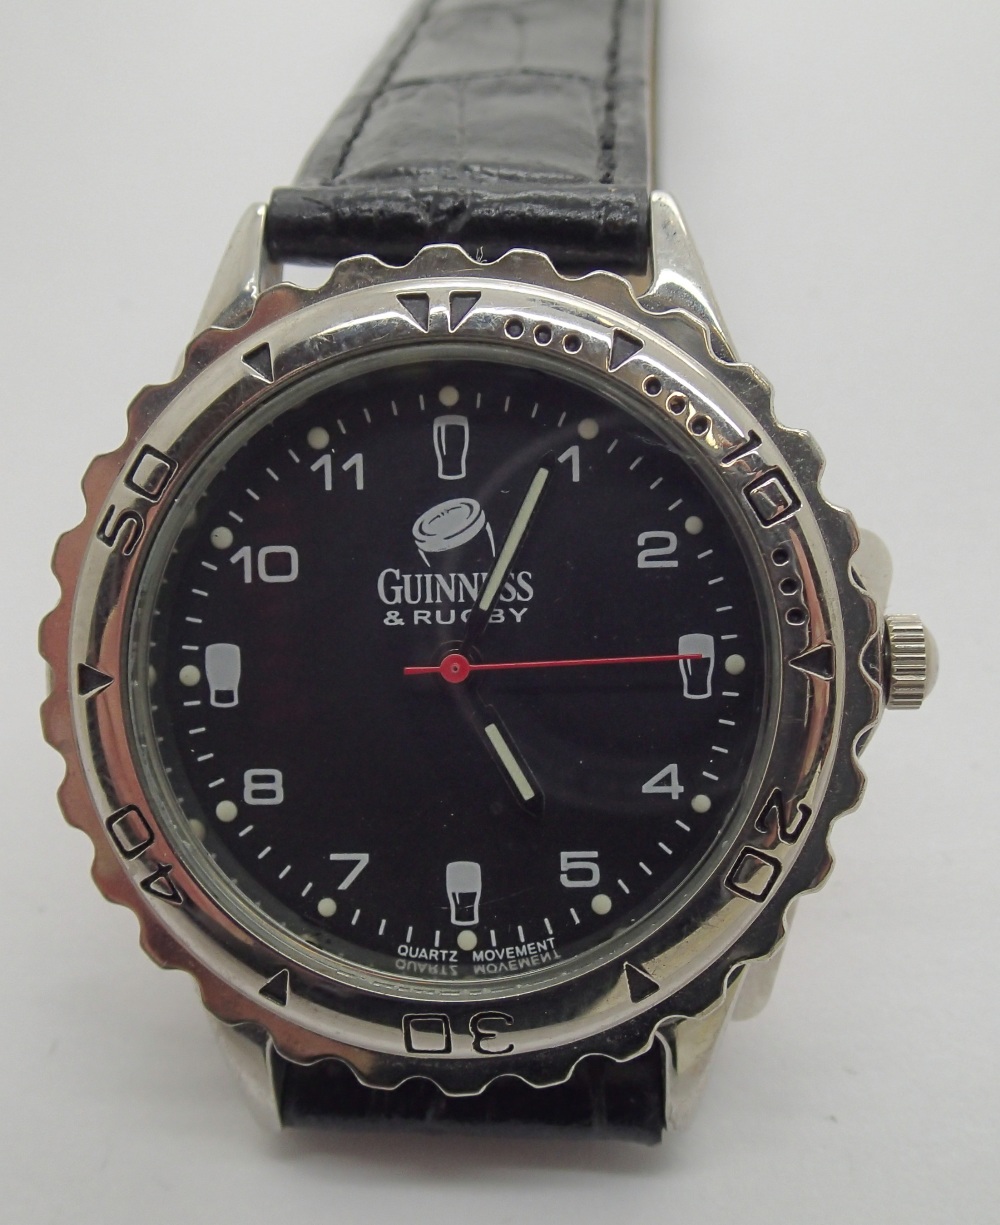 Mens Guinness wristwatch in good condition. Requires new battery.